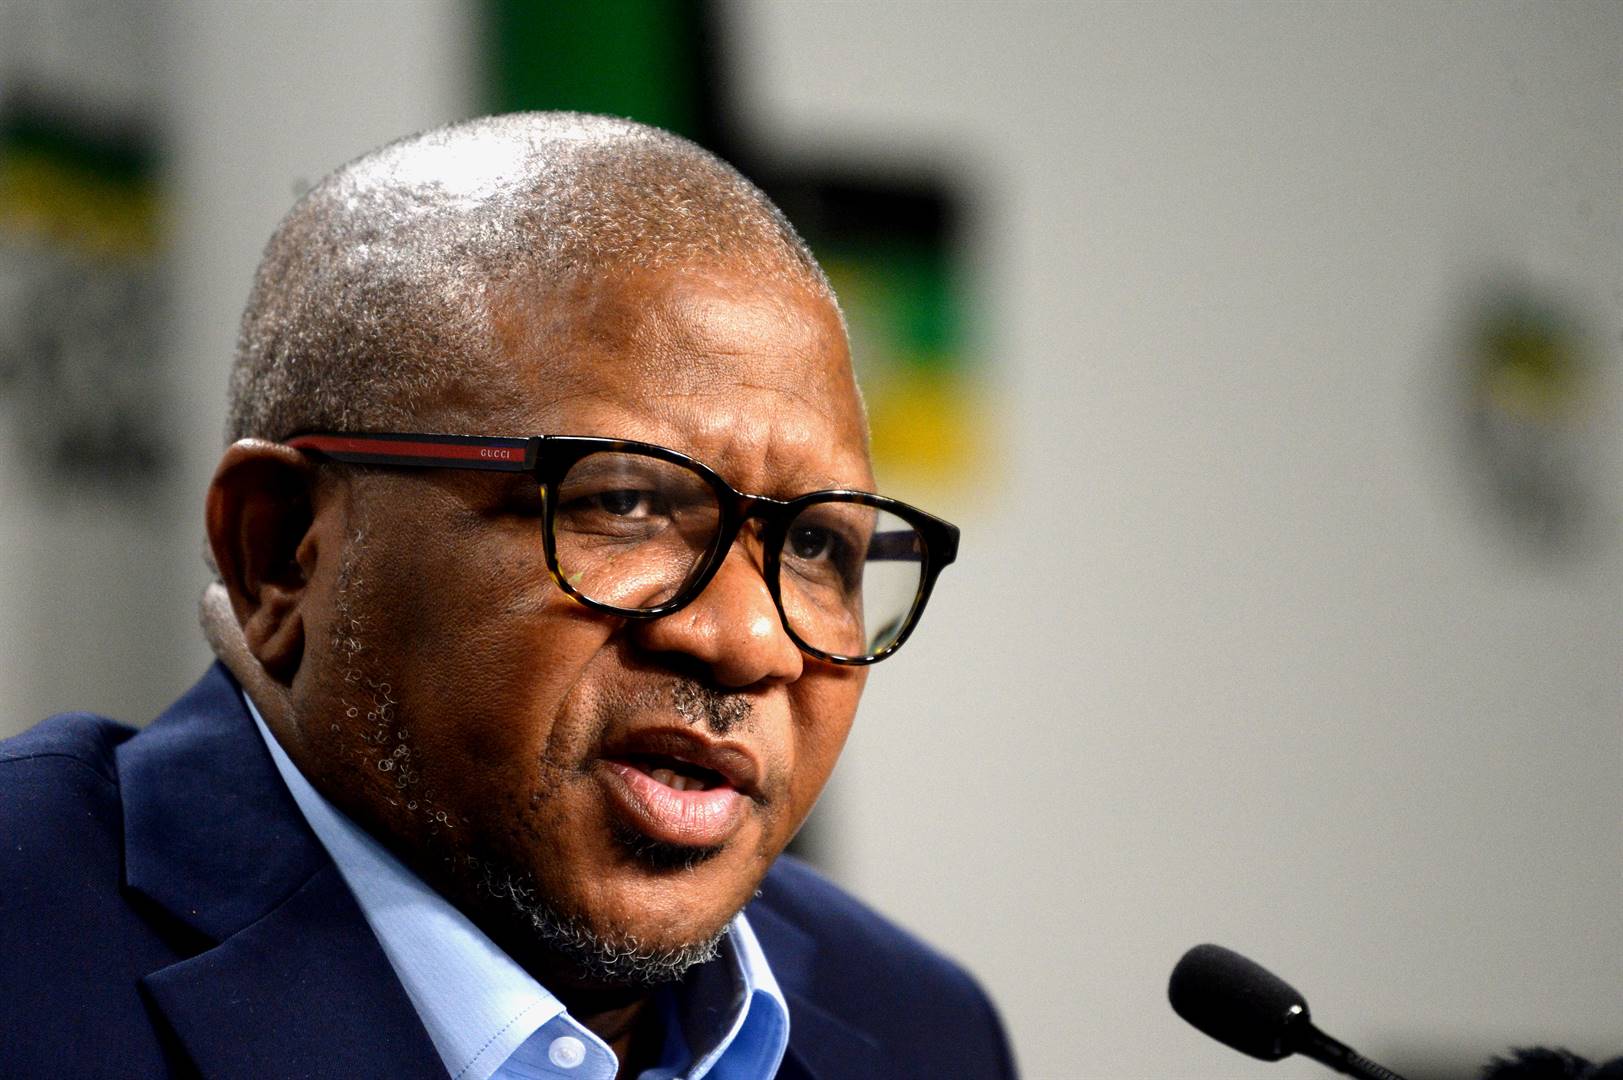 ANC secretary-general Fikile Mbalula opened a crimen injuria case against businessman Mthunzi Mdwaba after he accused him and two other ANC leaders of soliciting a R500 million bribe.  